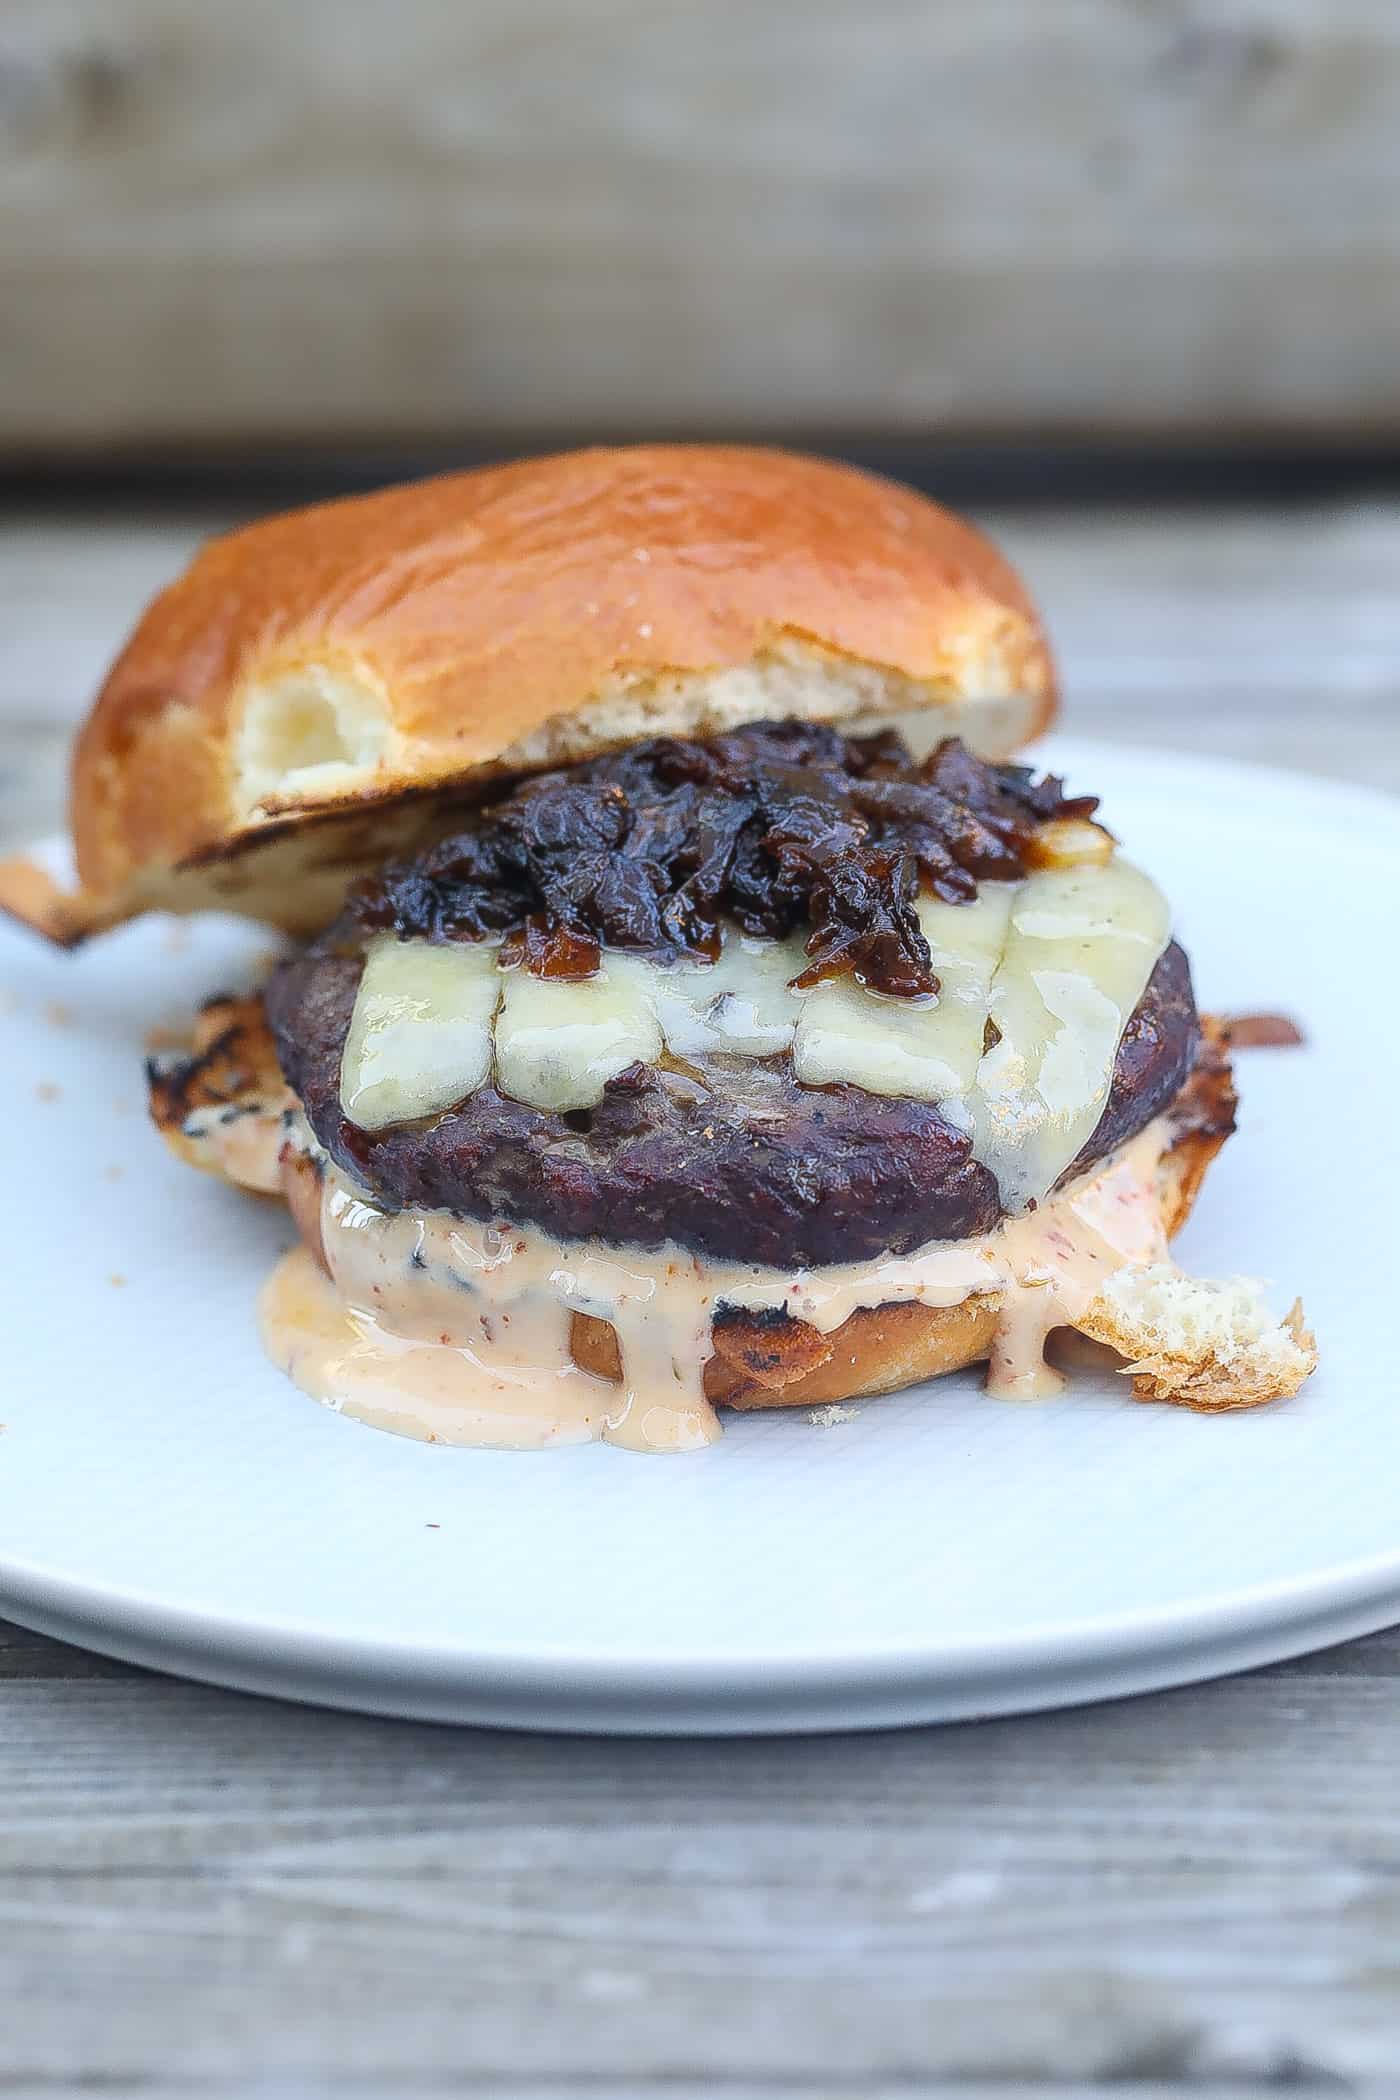 smoked burger with melted cheese, sauce, and caramelized onions